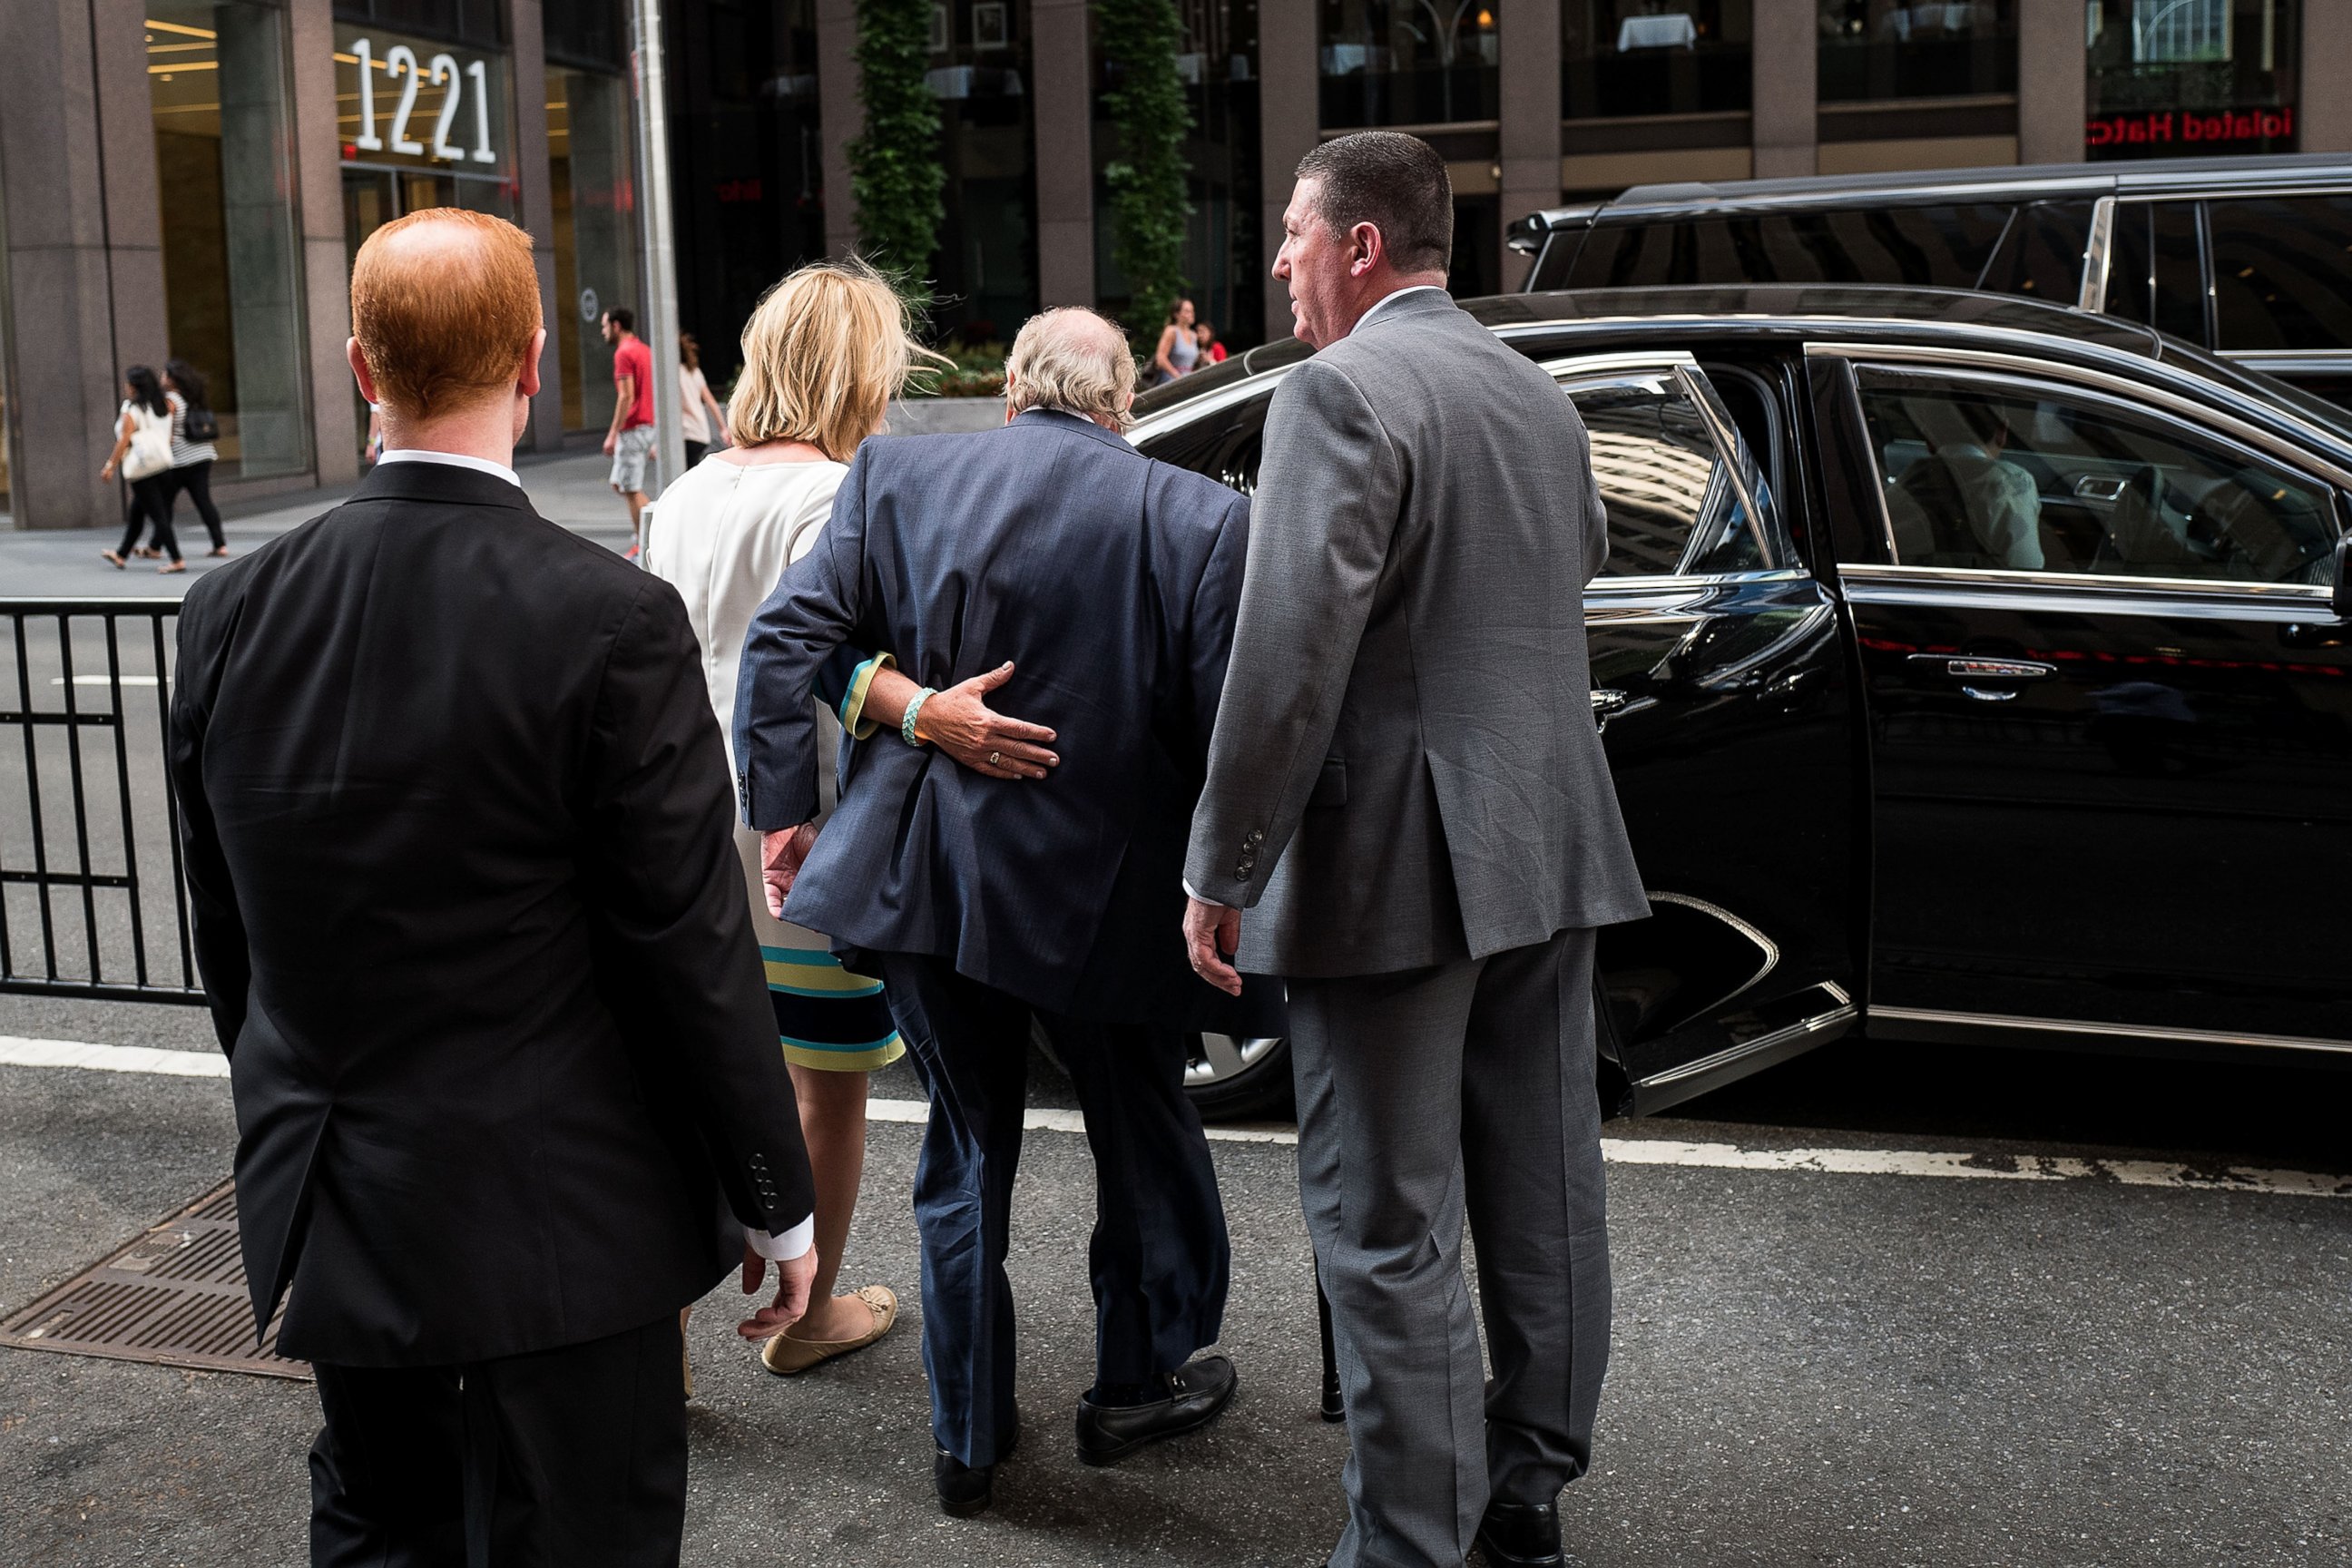 PHOTO: Fox News chairman Roger Ailes is helped to his car by his wife Elizabeth Tilson as they leave the News Corp building, July 19, 2016 in New York.